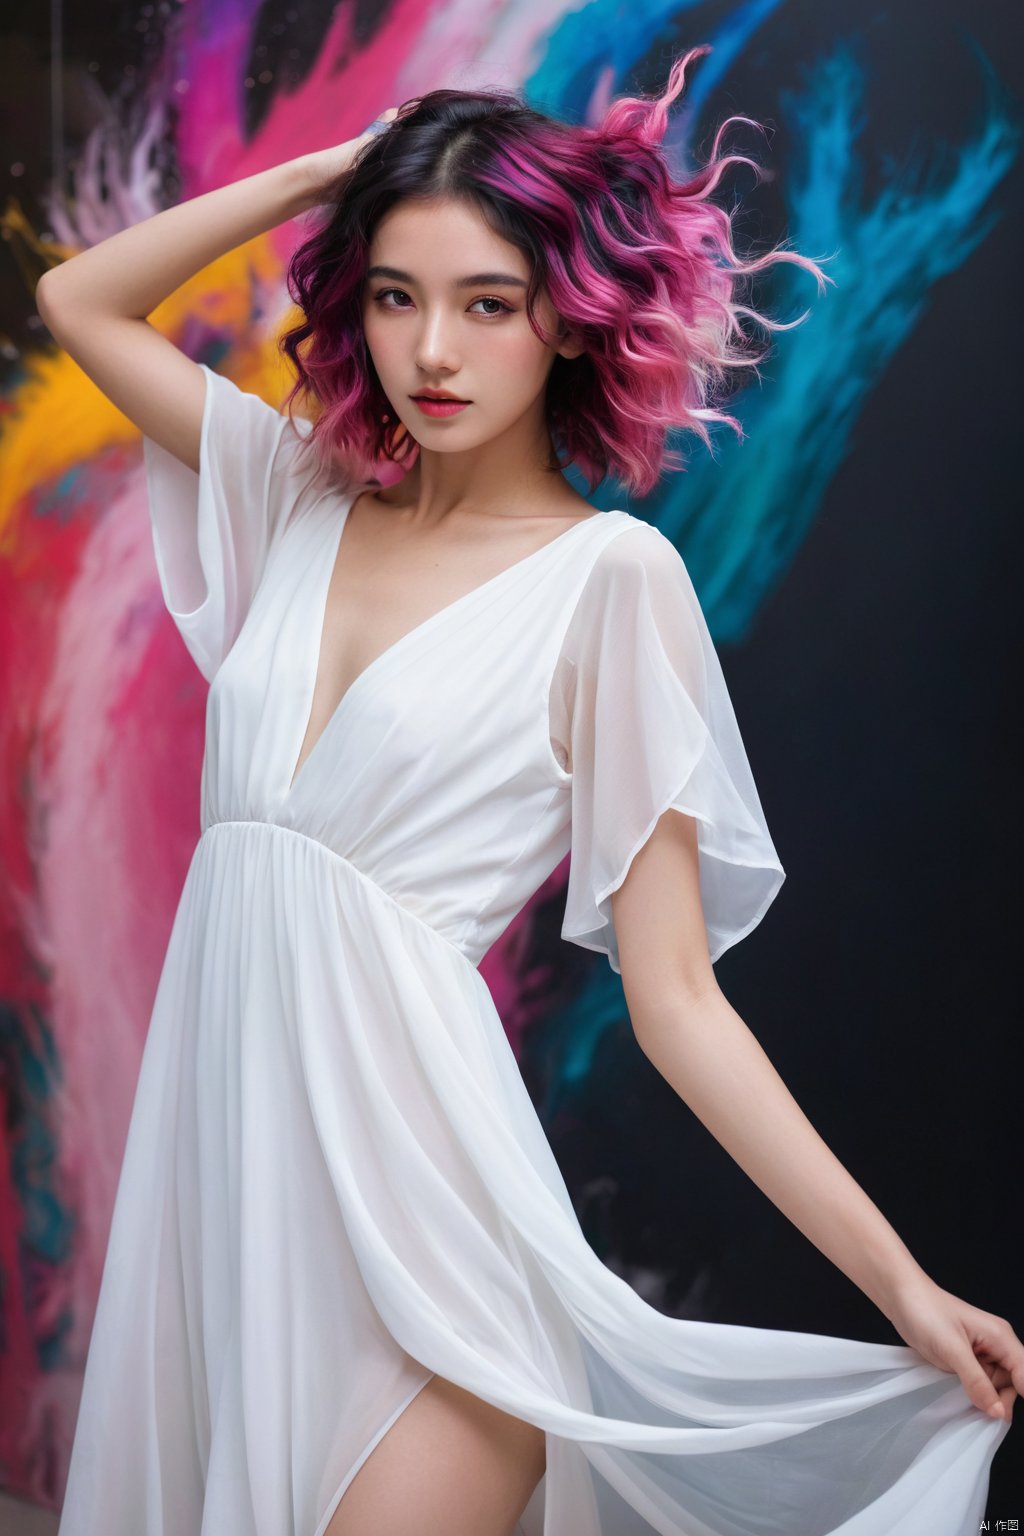 photorealistic,portrait of hubggirl, hubggirl, girl in a fluid and dynamic pose, wearing a loose, flowing white dress, mysterious expression, curly black and pink hair,hubg_jsnh, night, in a modern and abstract setting, with bold and colorful abstract art, blurred background, bright lighting, official art, uniform 8k wallpaper,(Feathers everywhere :1.3), depth of field level,